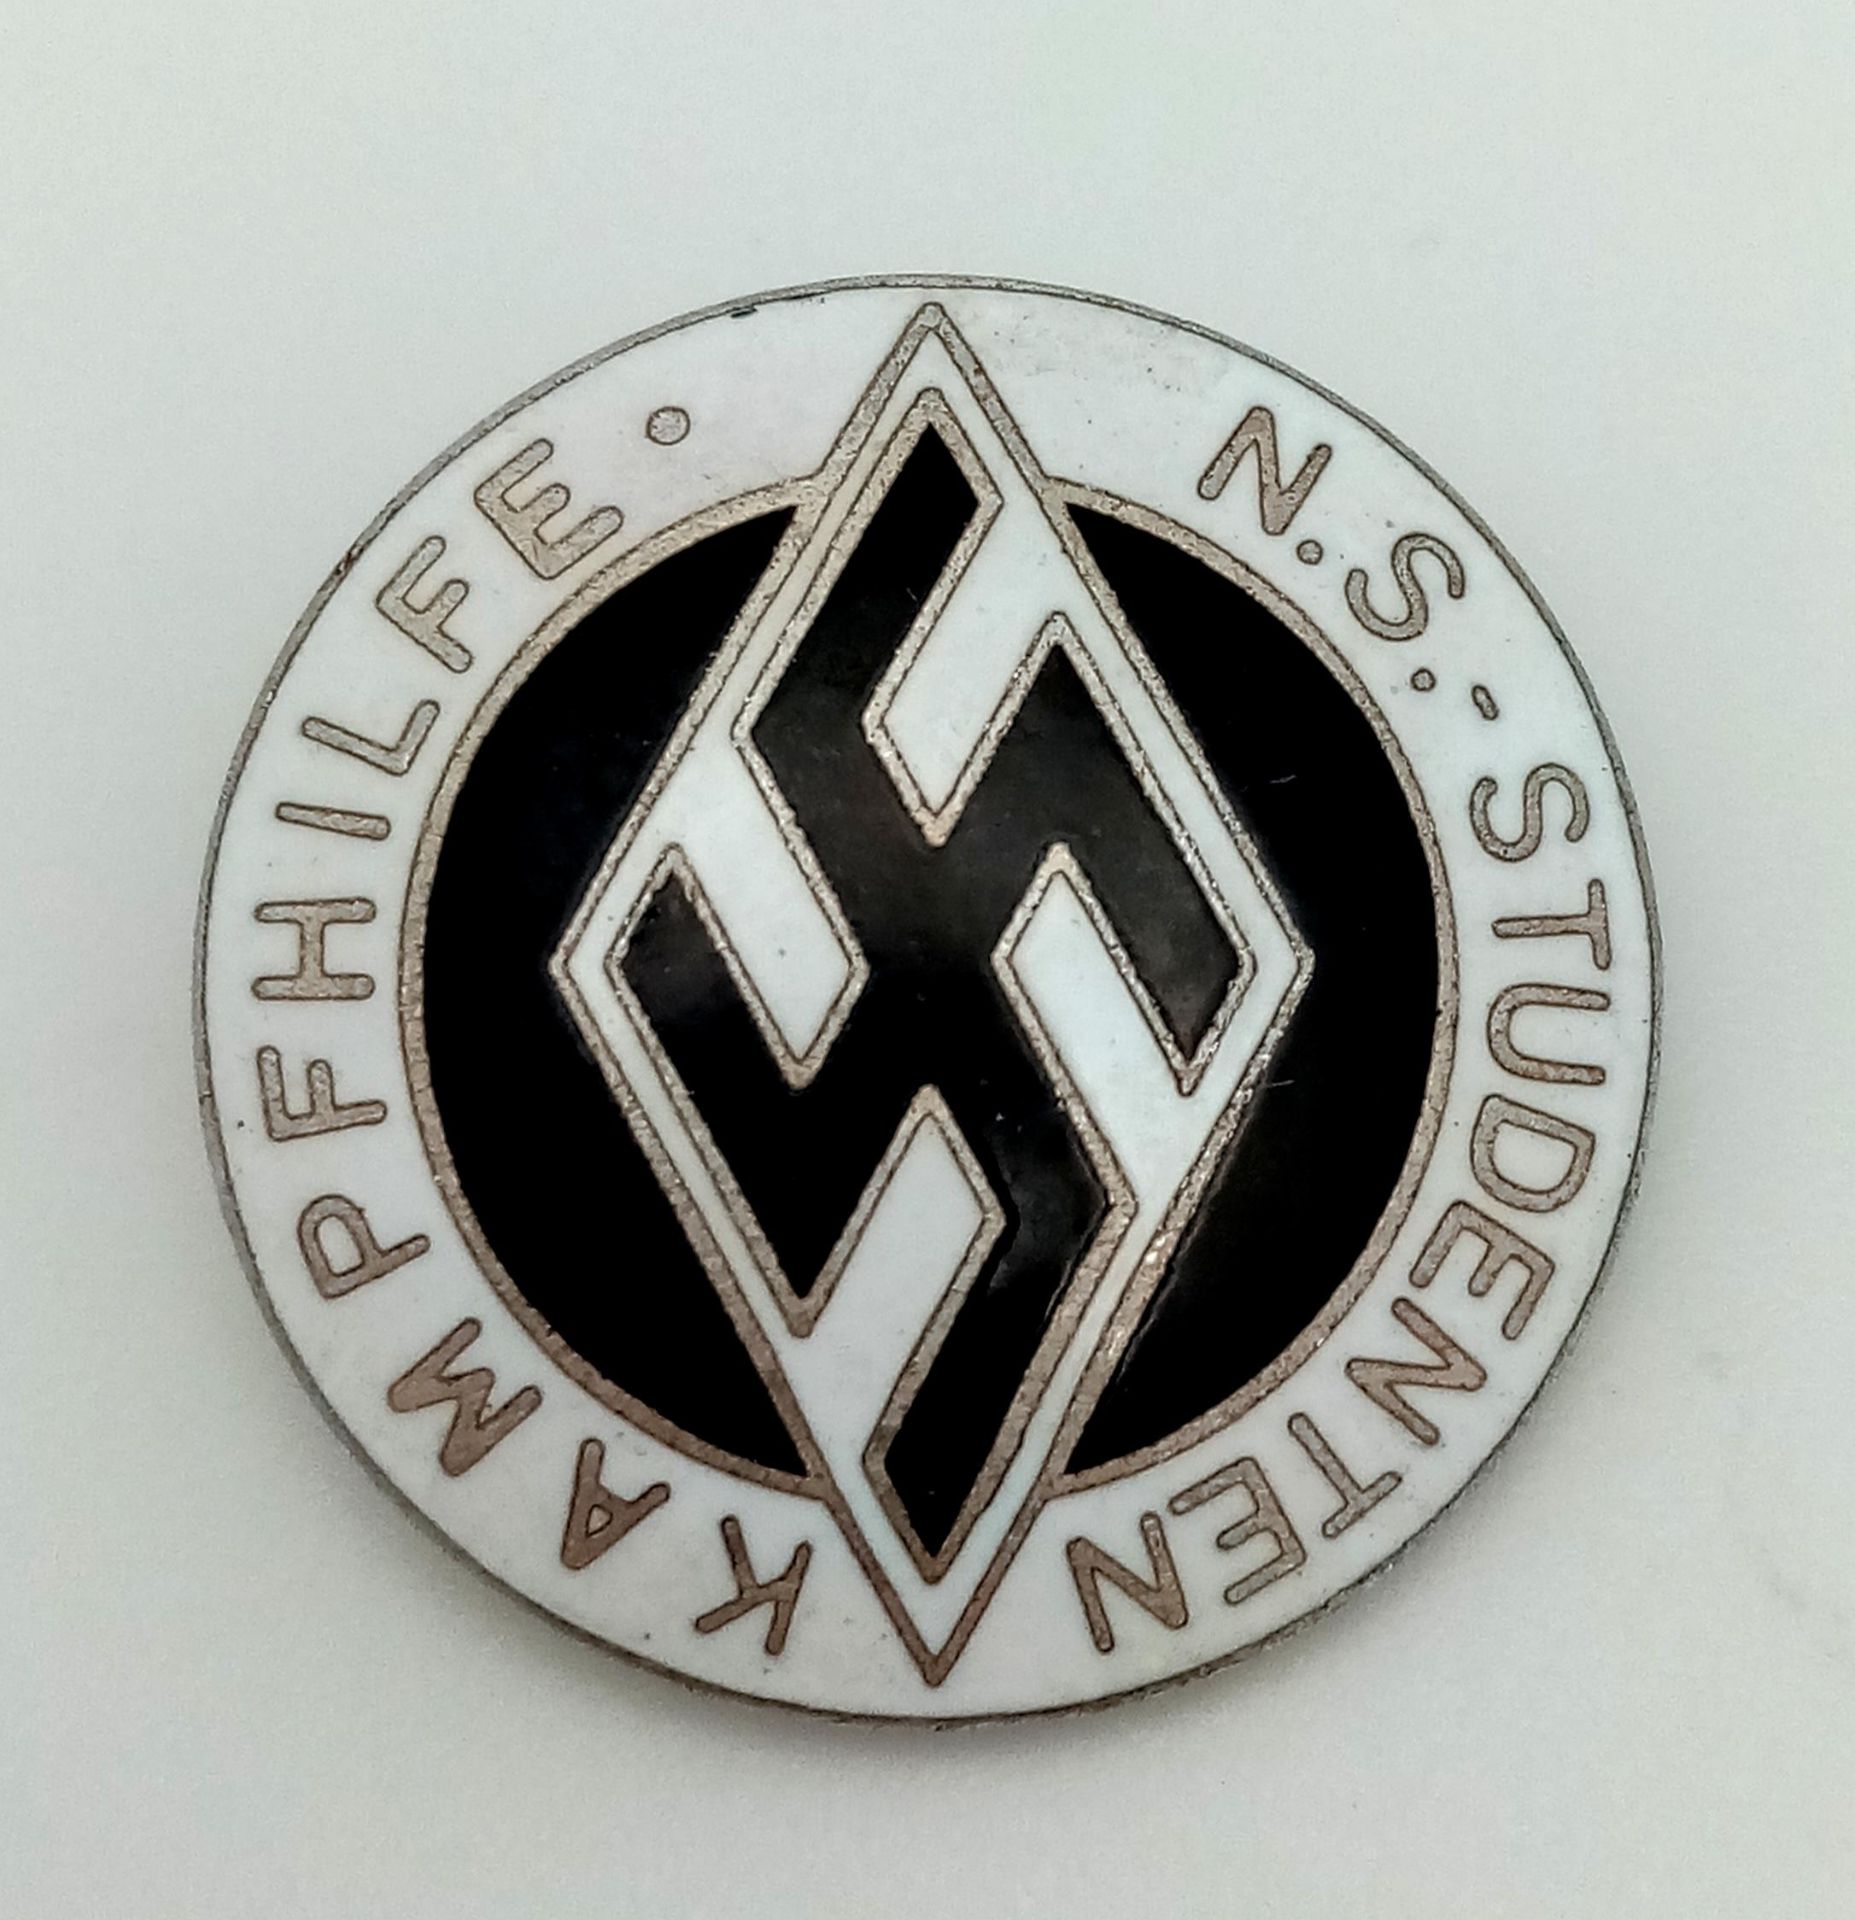 3rd Reich N.S Student “Kampfhilfe” Combat Aid Pin, given to Students who helped with the War Effort.